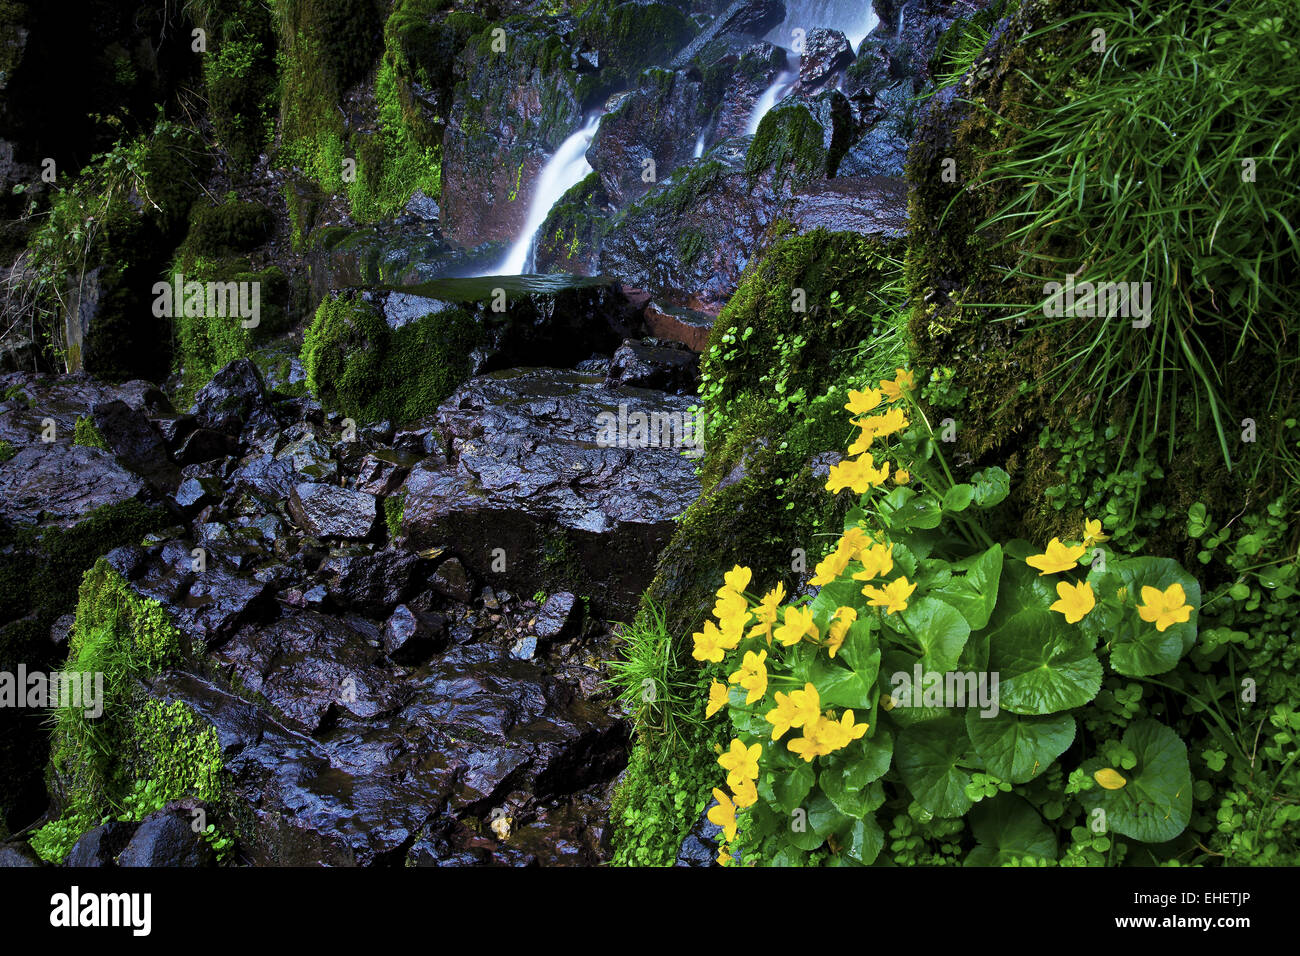 Nideck waterfall, Alsace, France Stock Photo